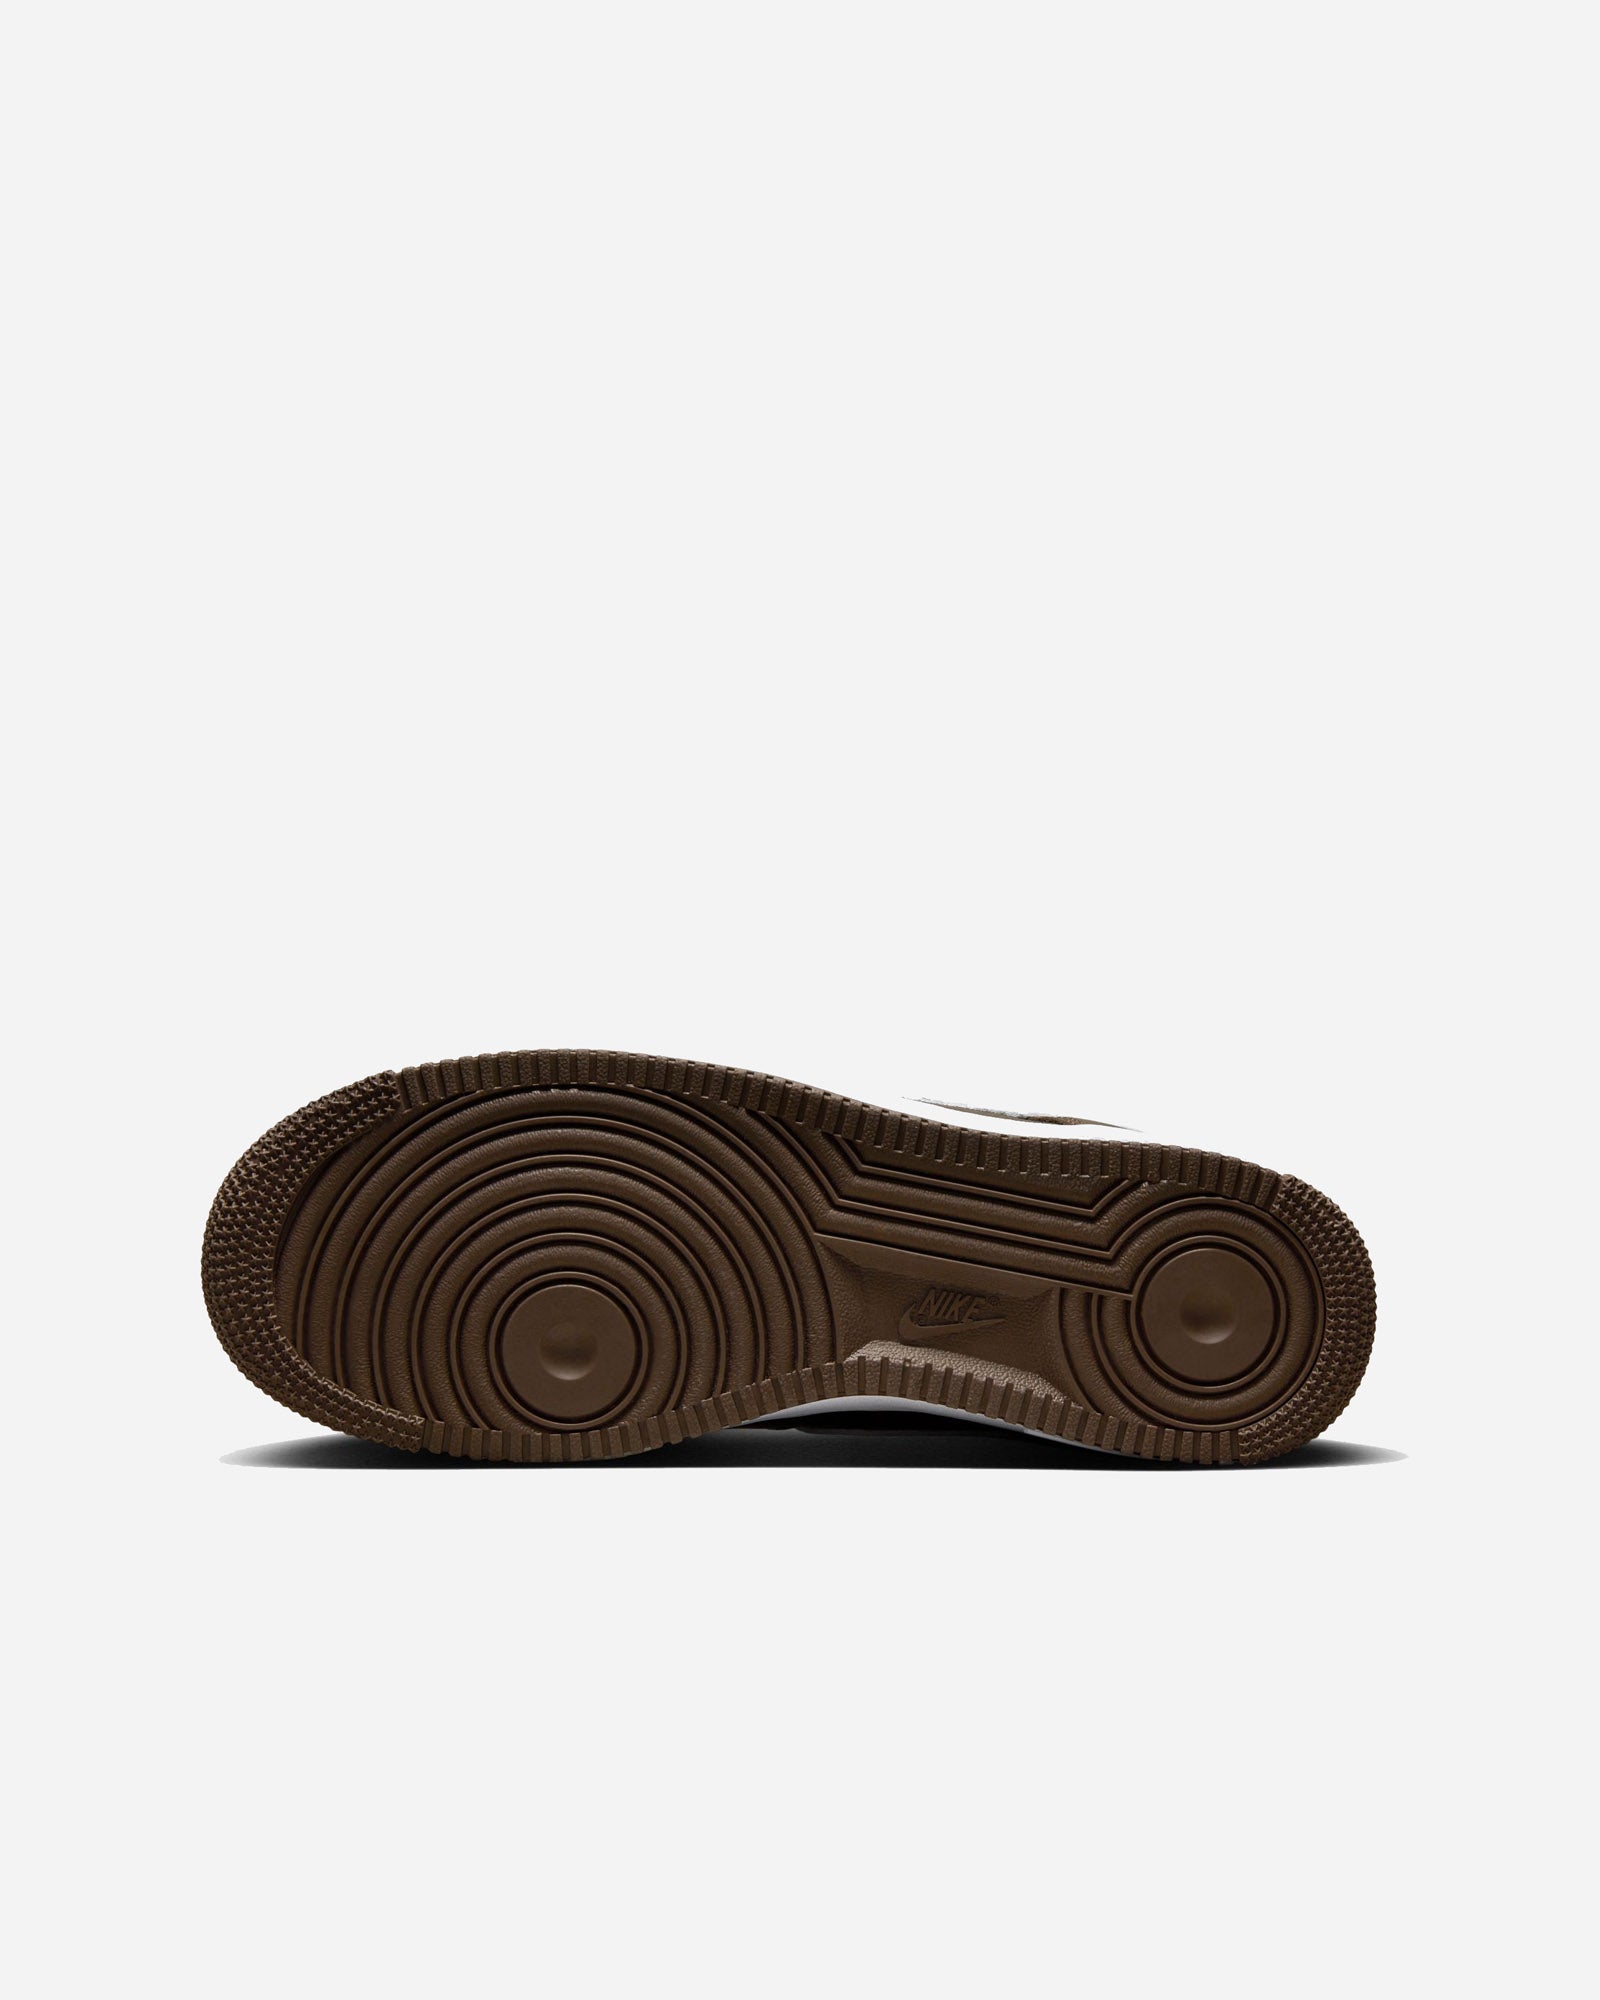 Nike Air Force 1 Low Retro QS "Chocolate" image